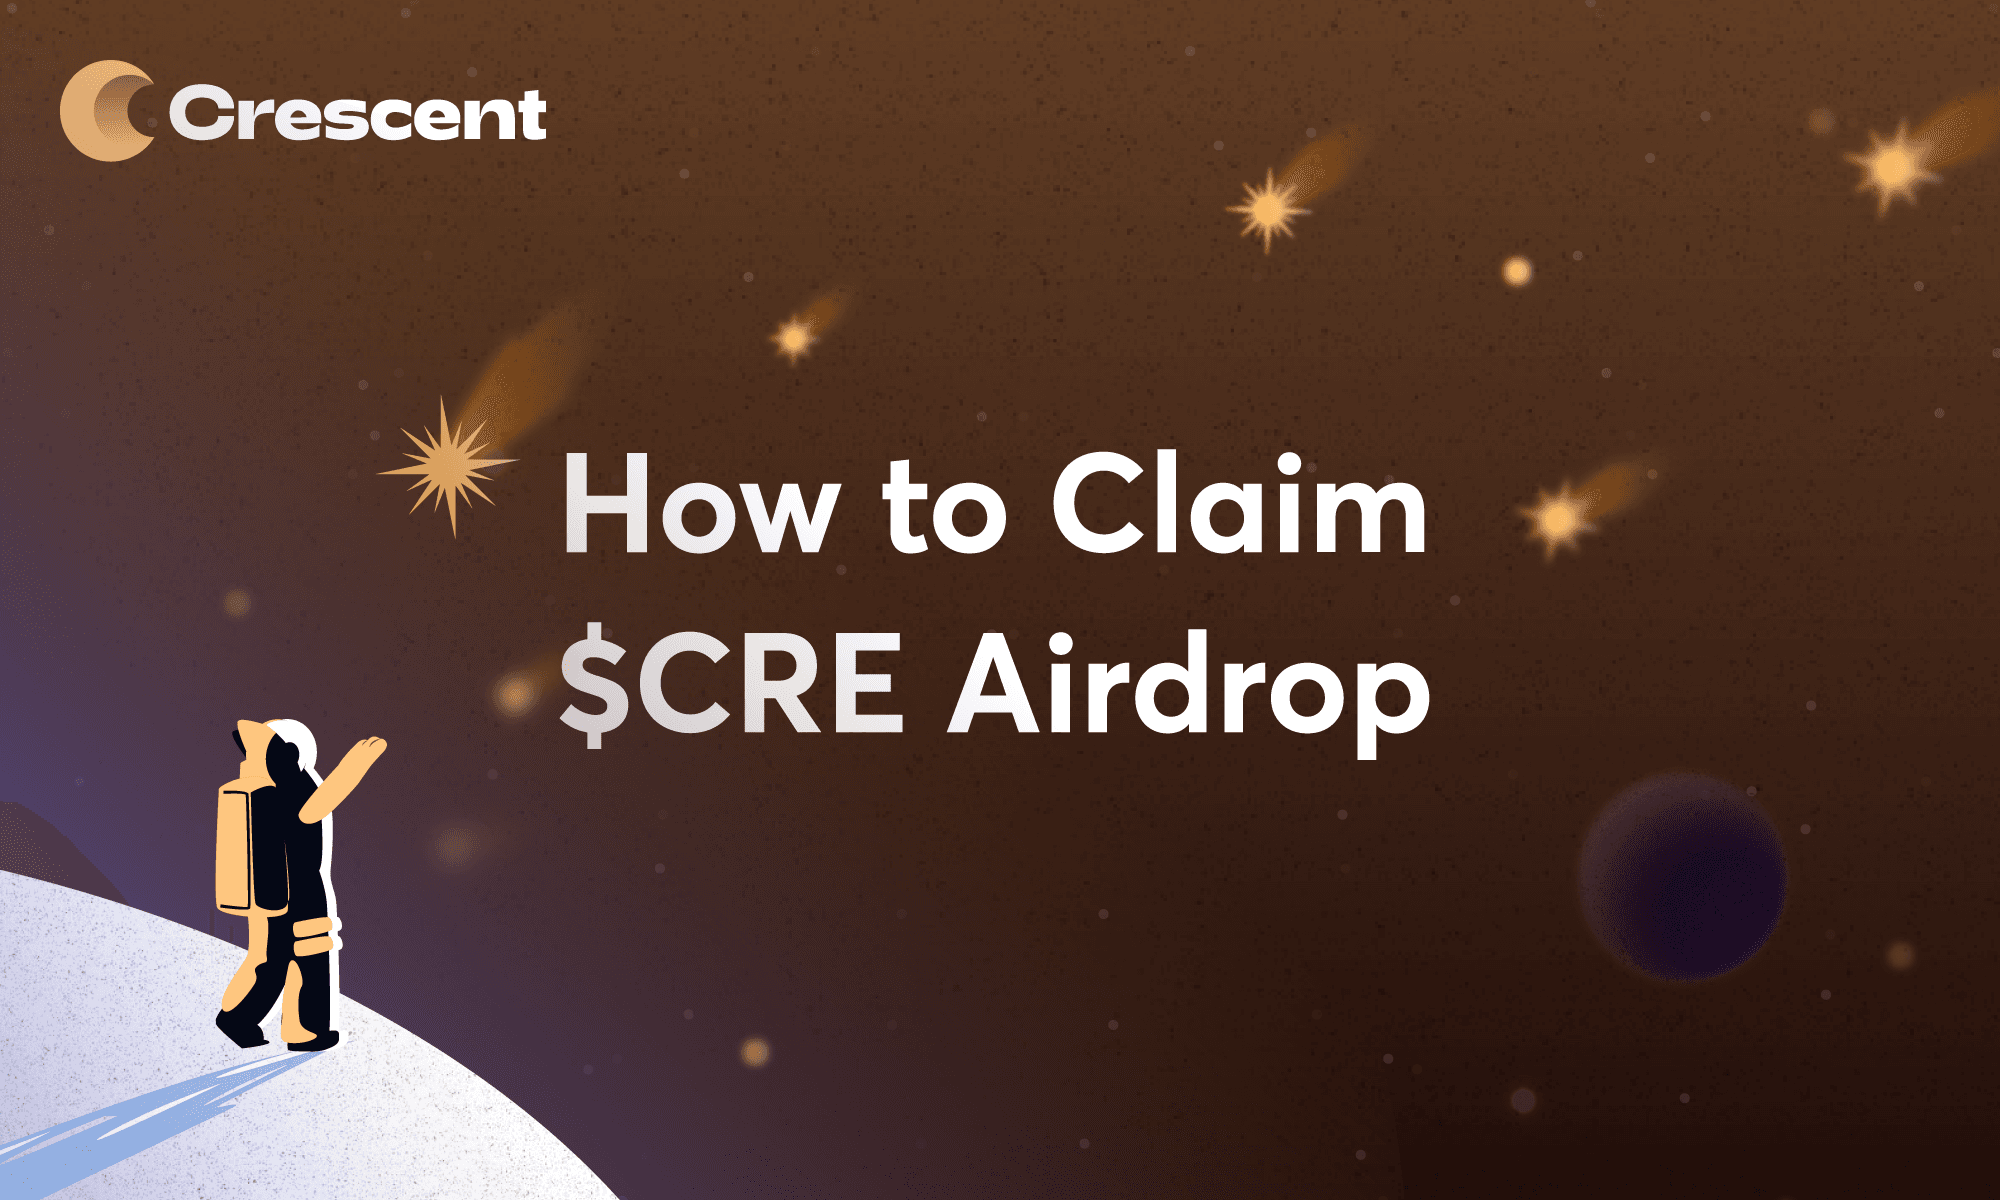 How to Claim $CRE Airdrop